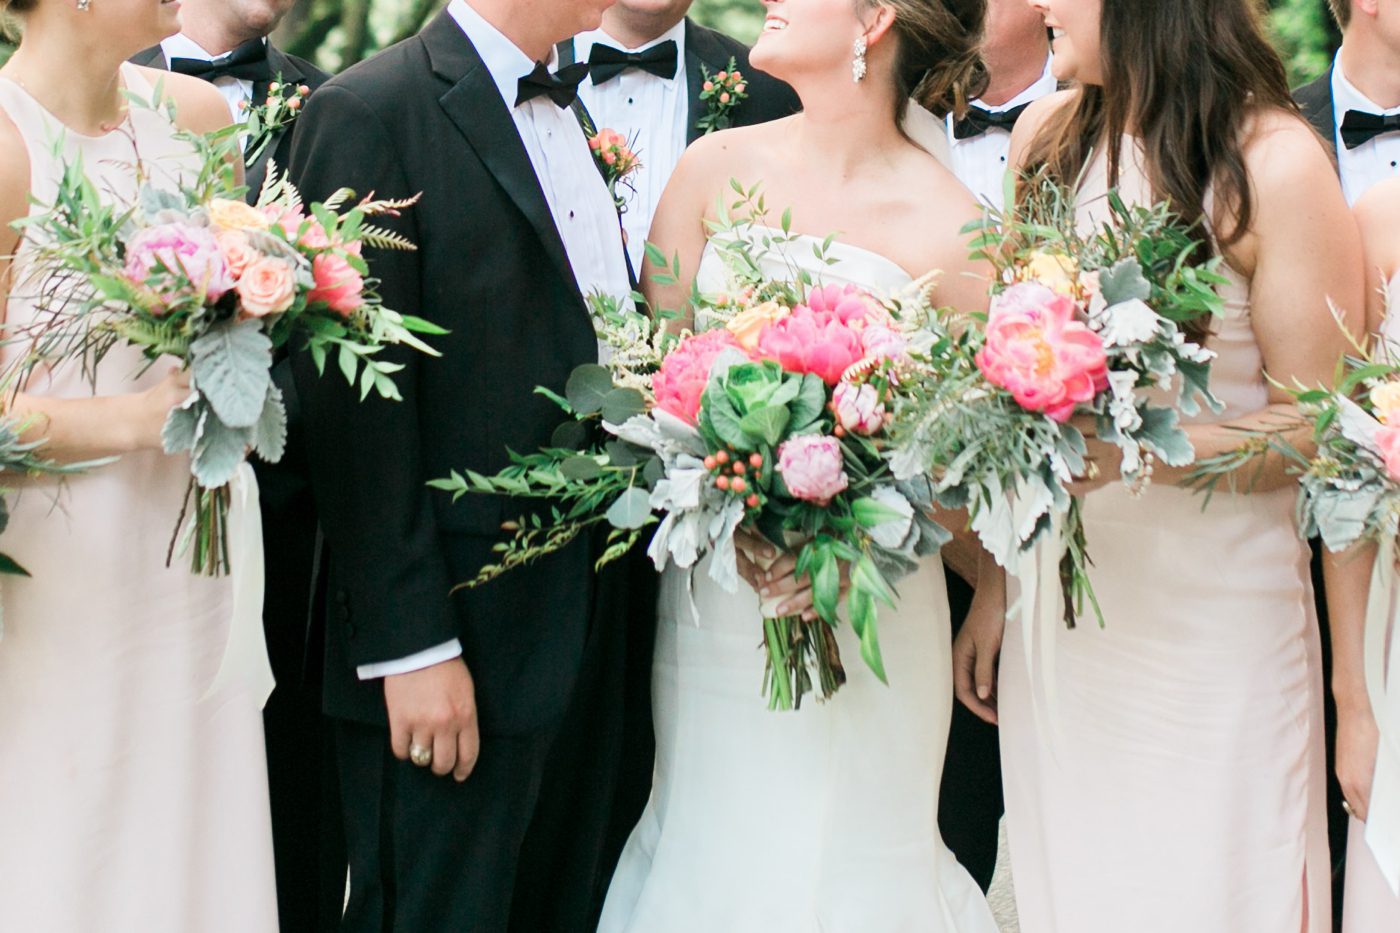 Candid wedding photography of the bridal party. Photo by Charleston wedding photographer Catherine Ann Photography